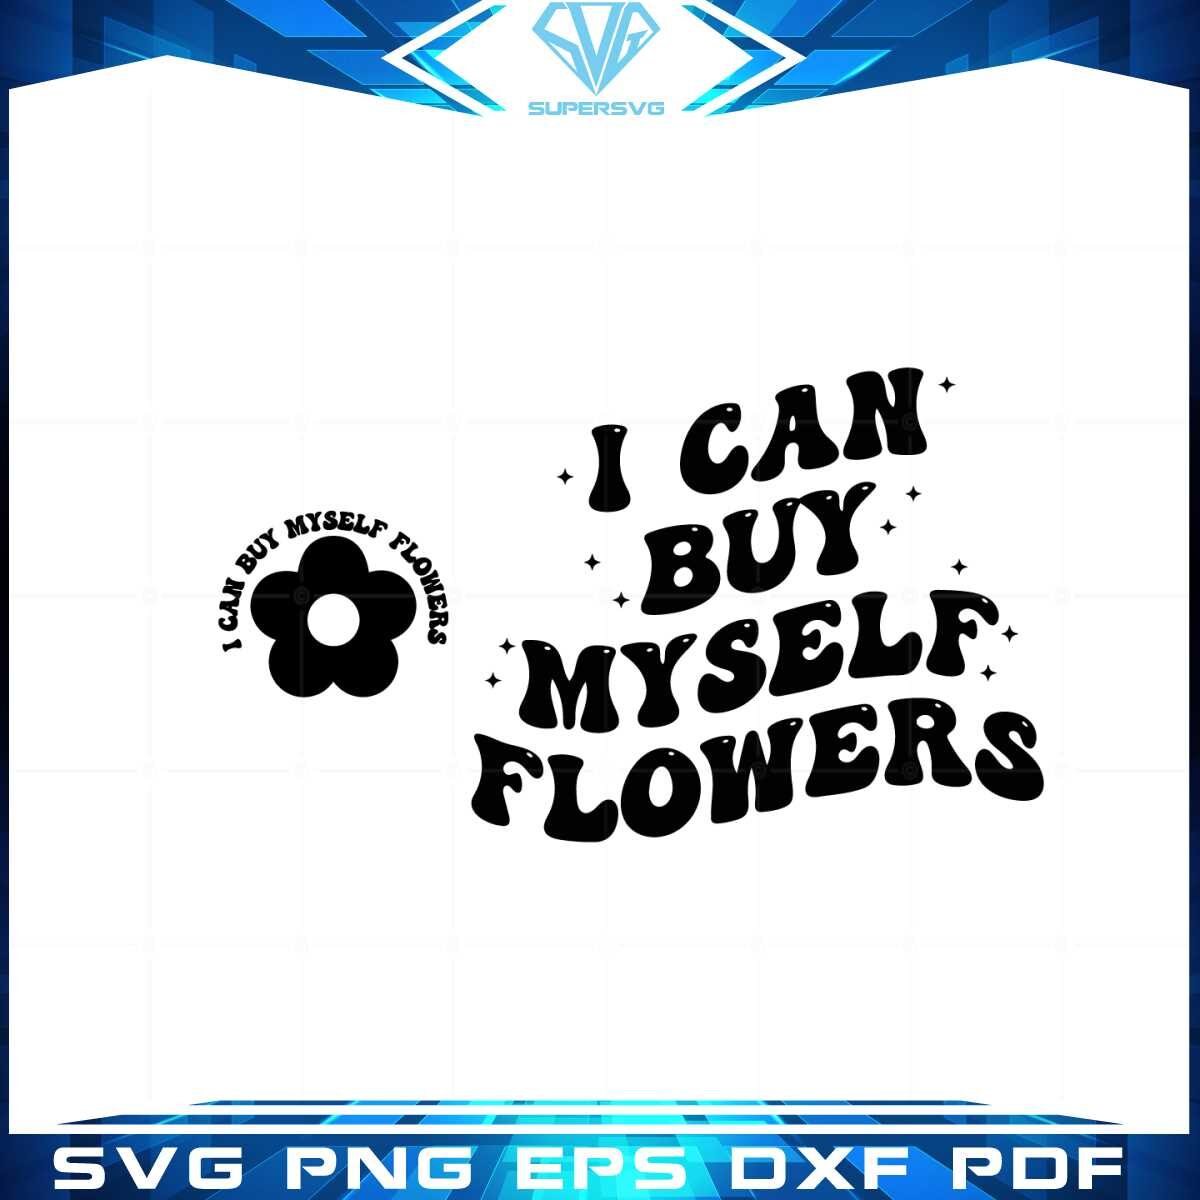 i-can-buy-myself-flowers-flowers-song-lirics-svg-cutting-files